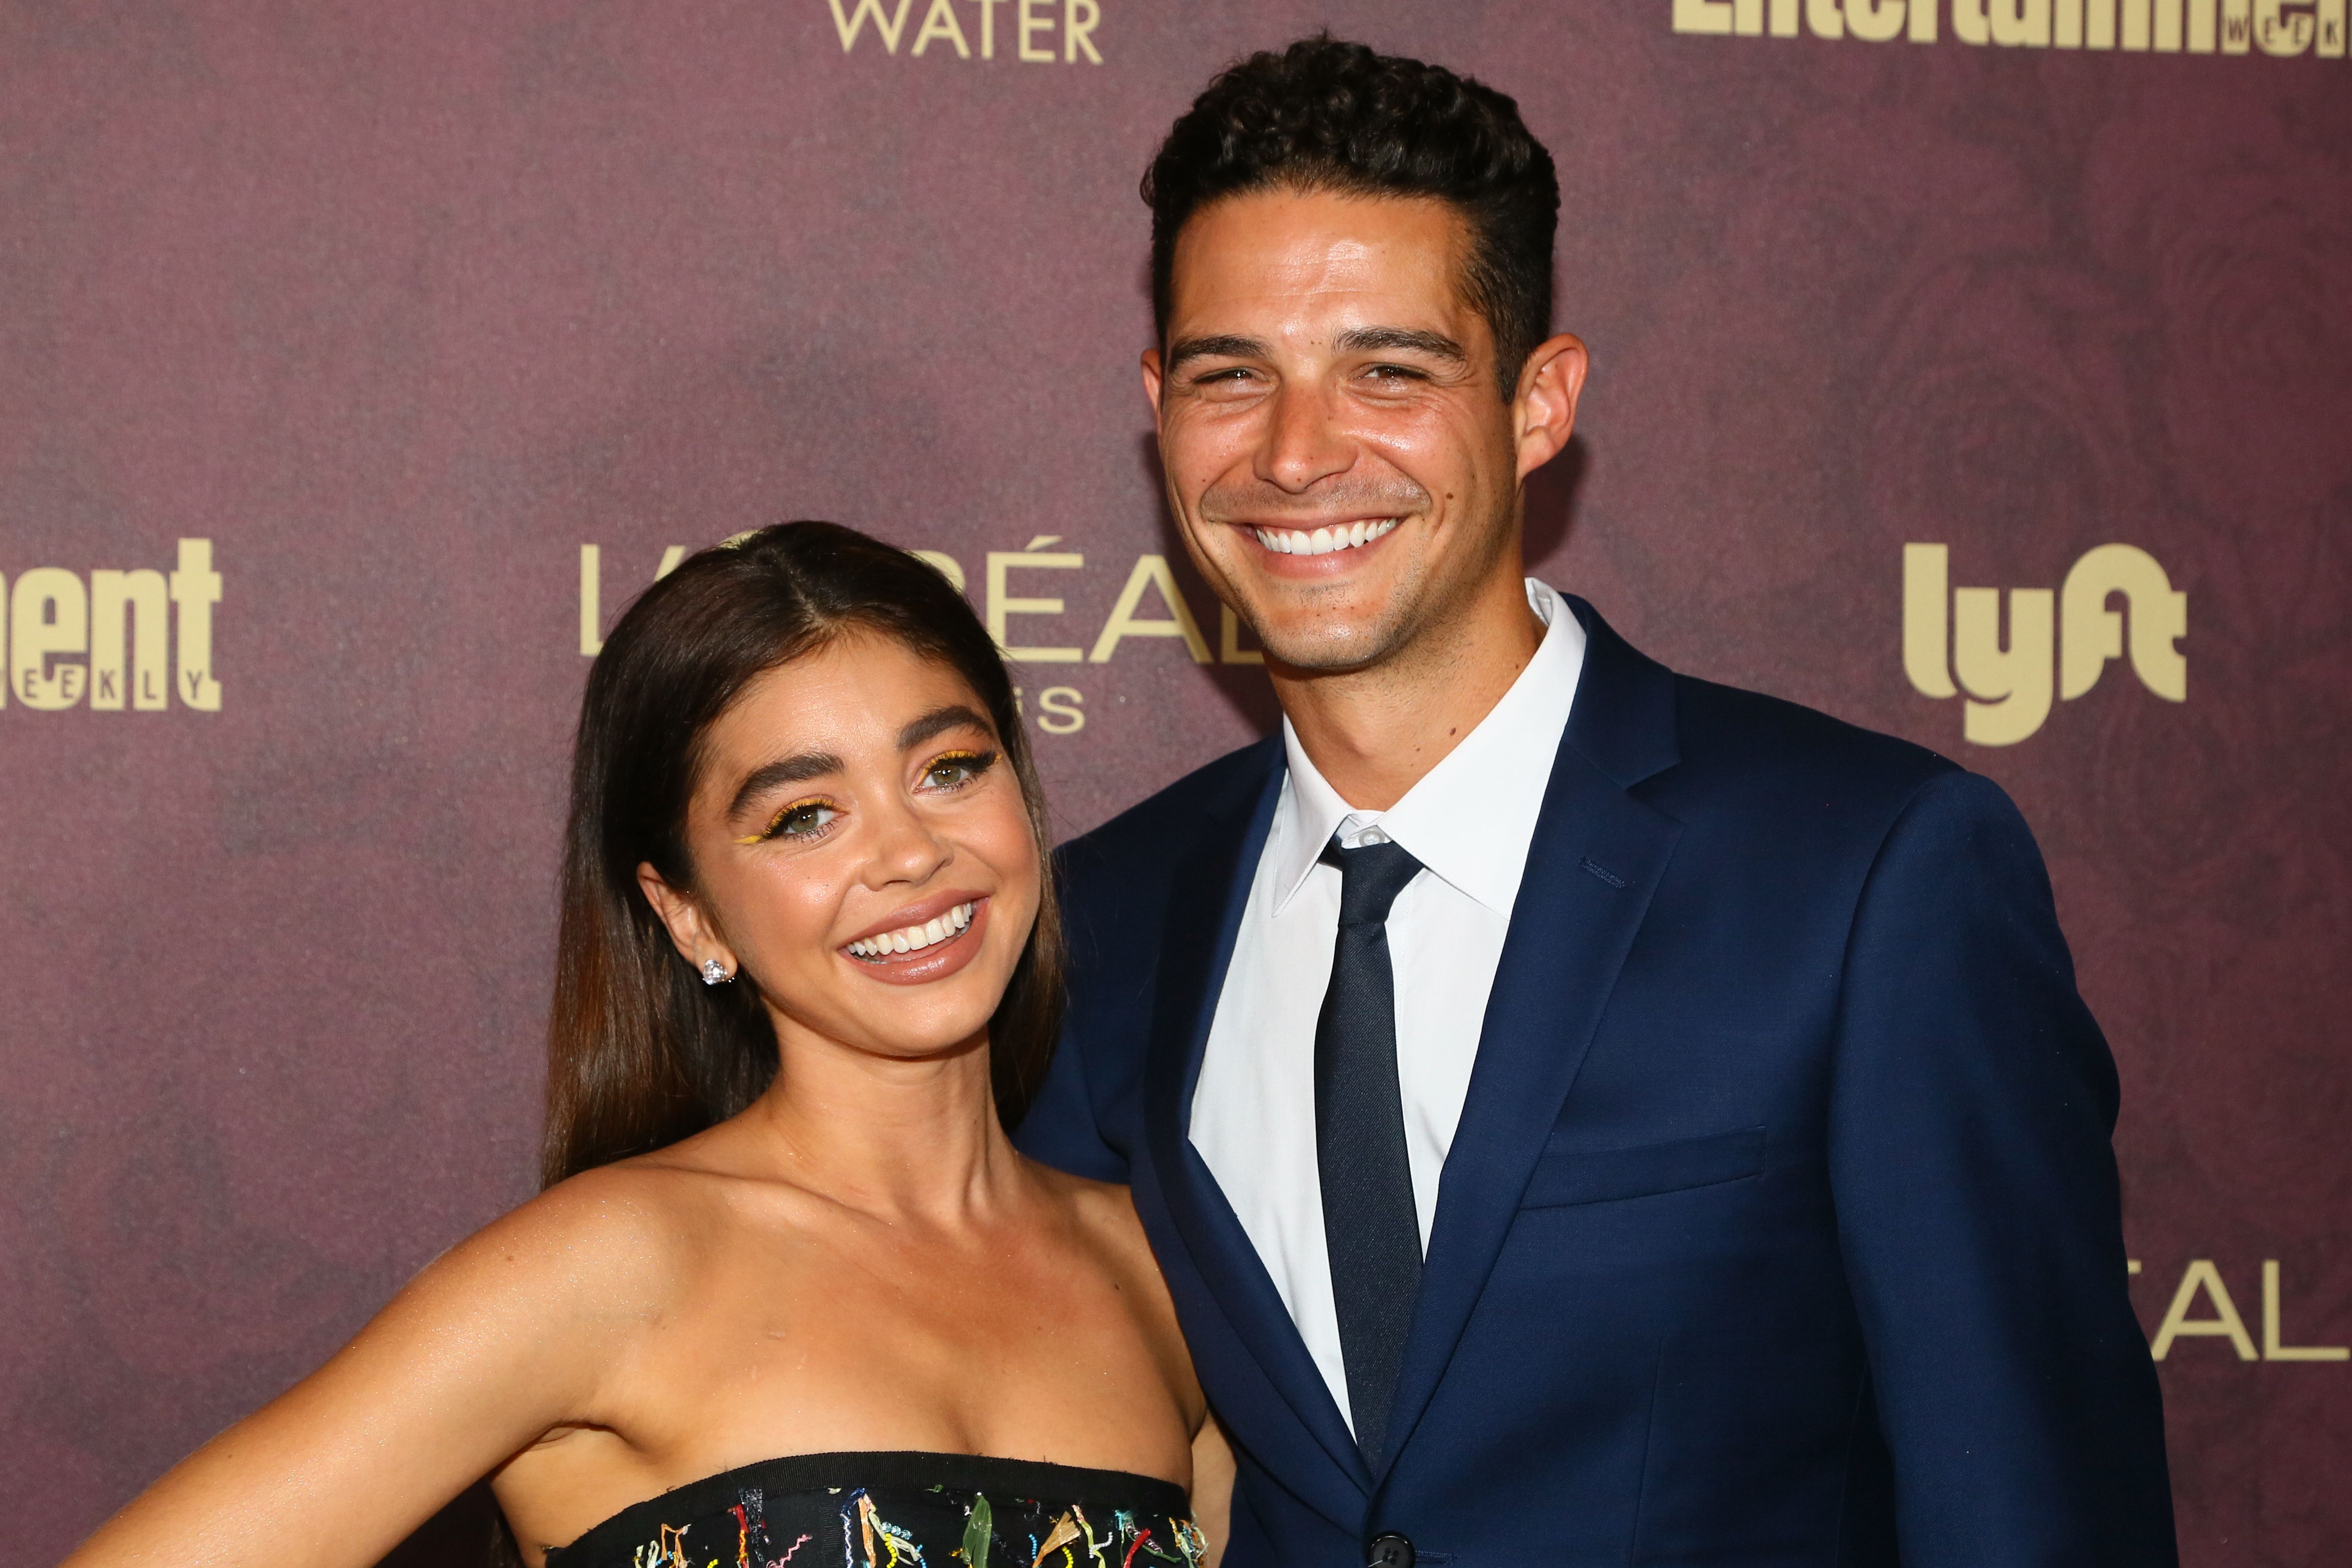 Sarah Hyland and Wells Adams at the 2018 Entertainment Weekly Pre-Emmy Party in West Hollywood | Source: Getty Images